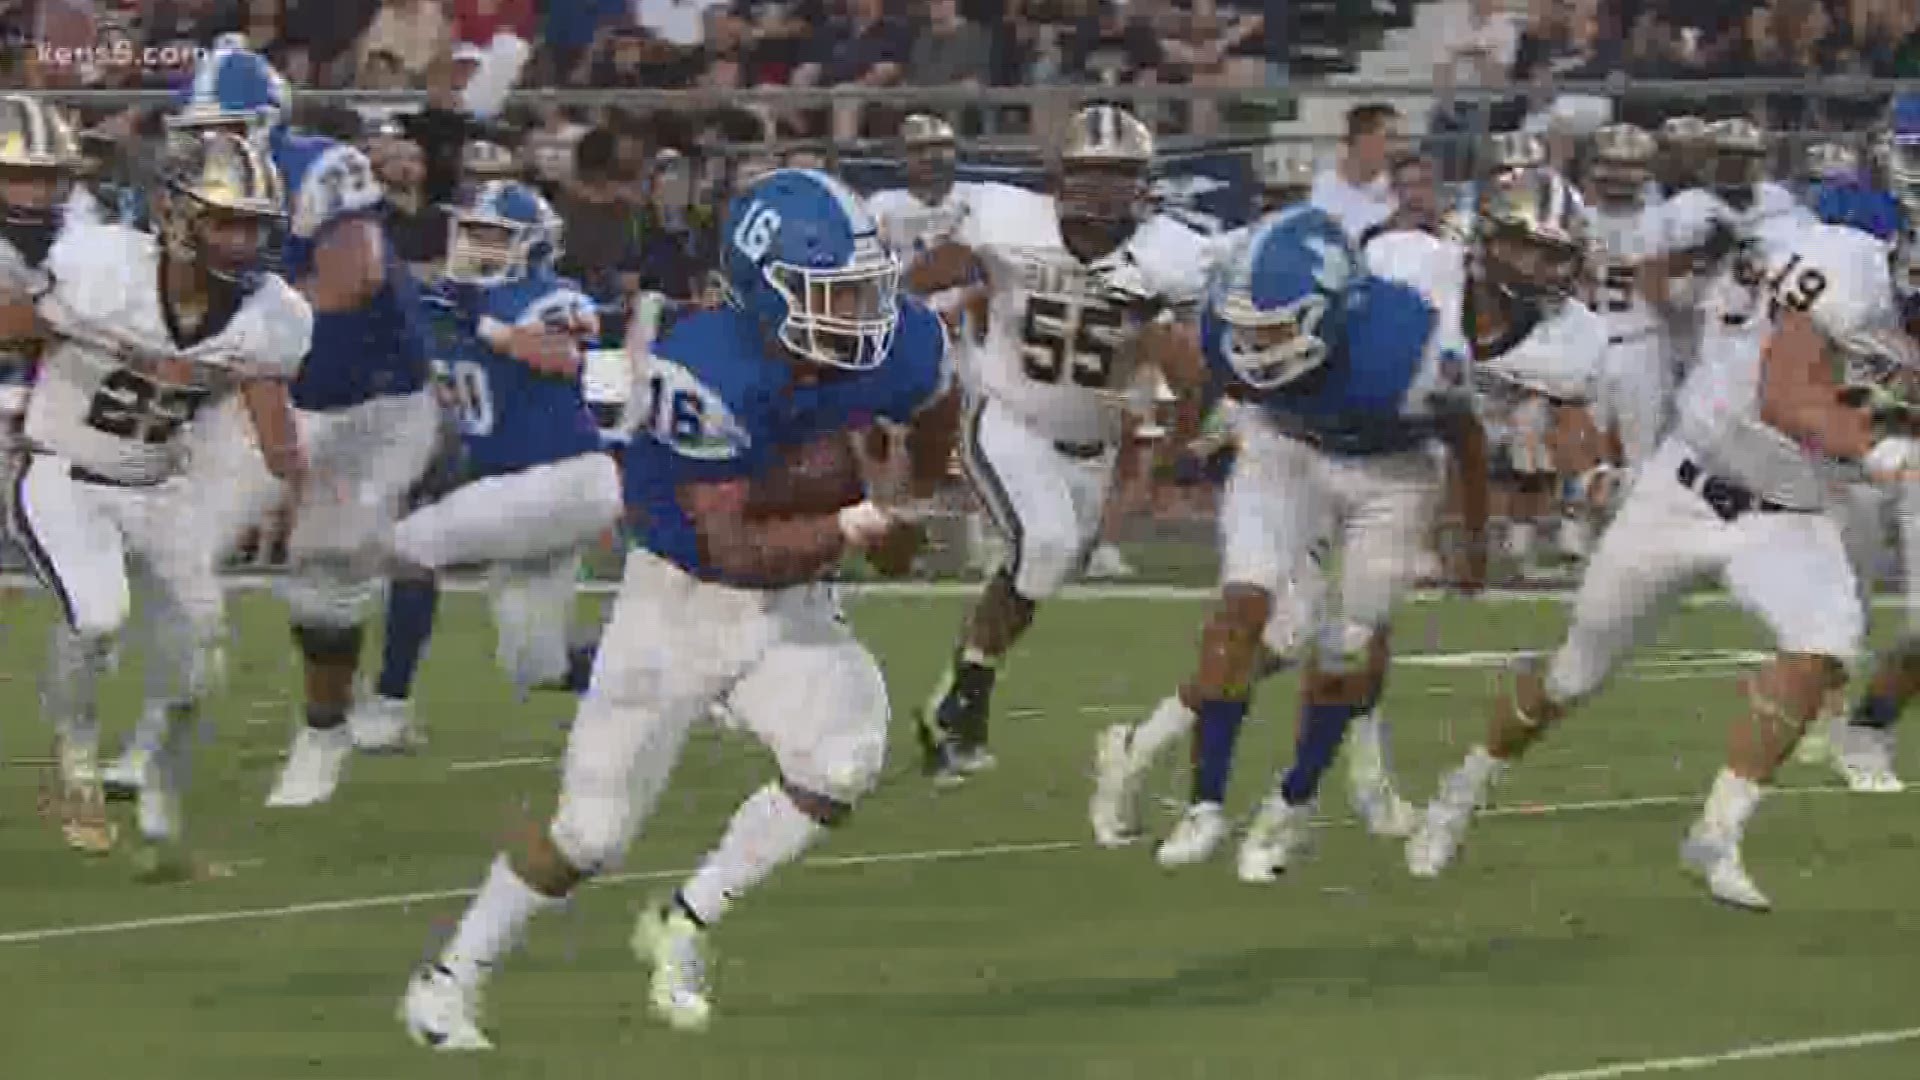 Among the early Week 4 games was a throttling of Clark by Brandeis and a shutout of Lanier.